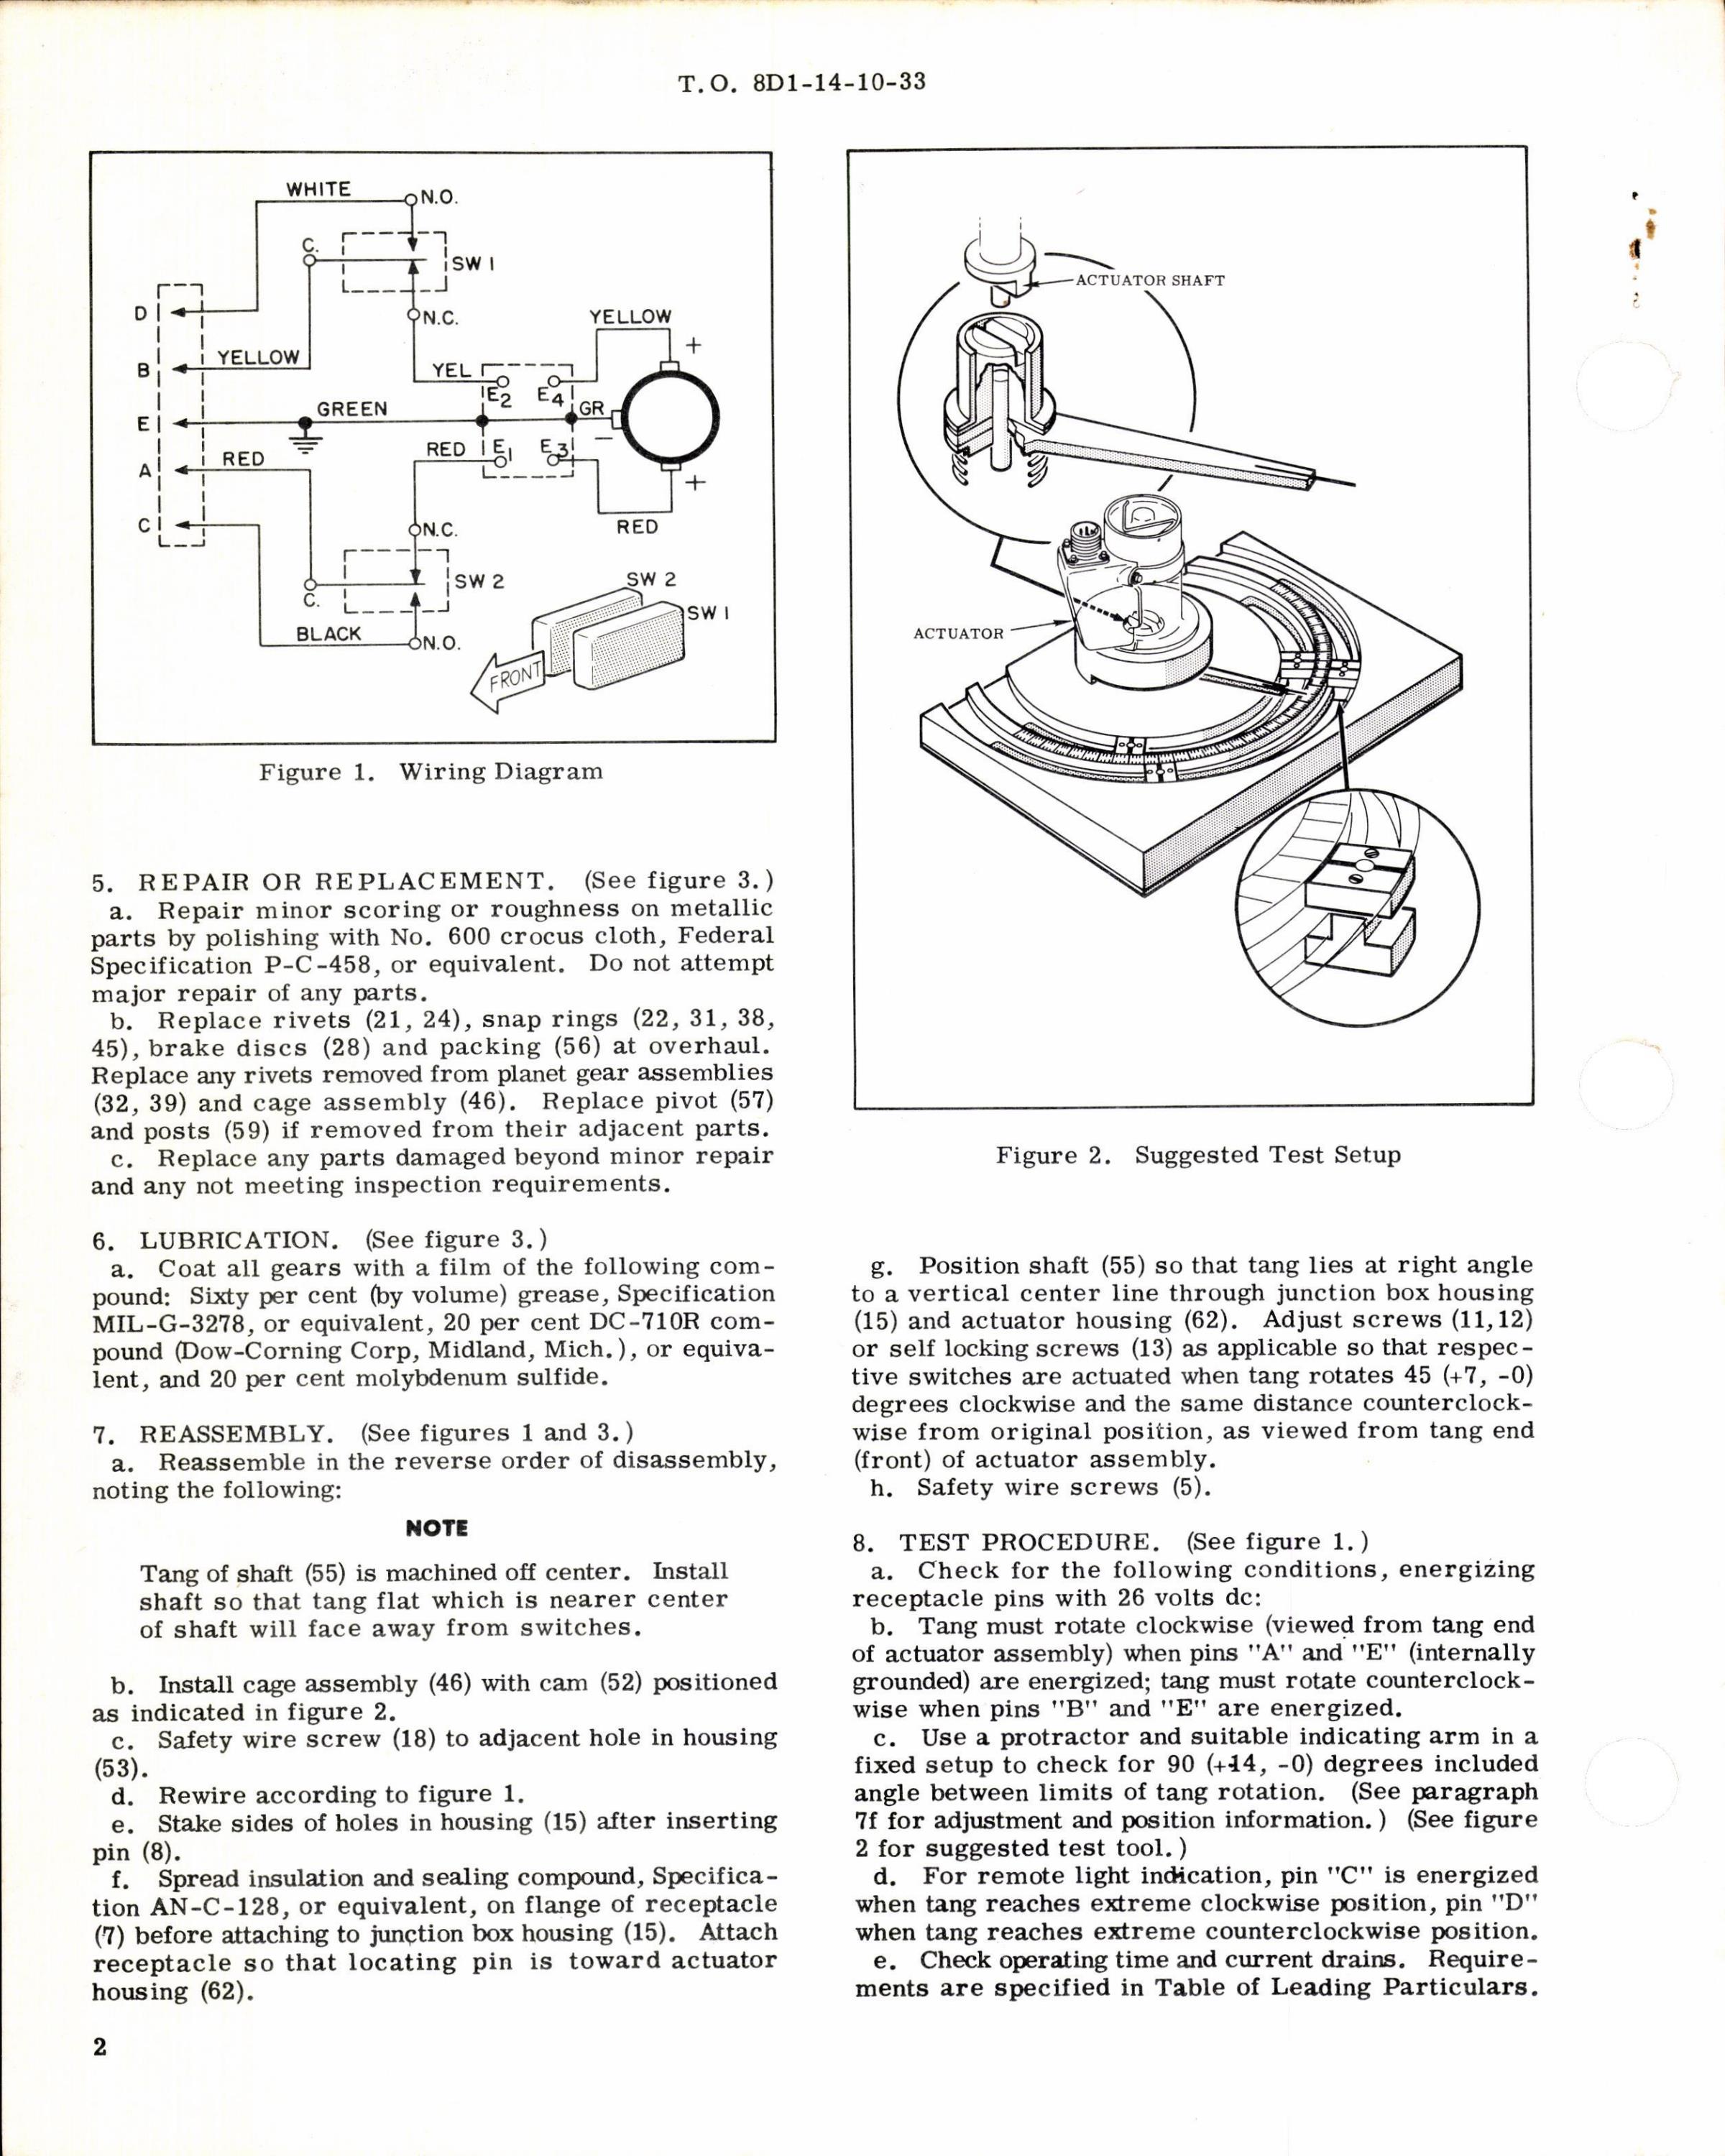 Sample page 2 from AirCorps Library document: Instructions w Parts Breakdown for Actuator Assembly Part 108820